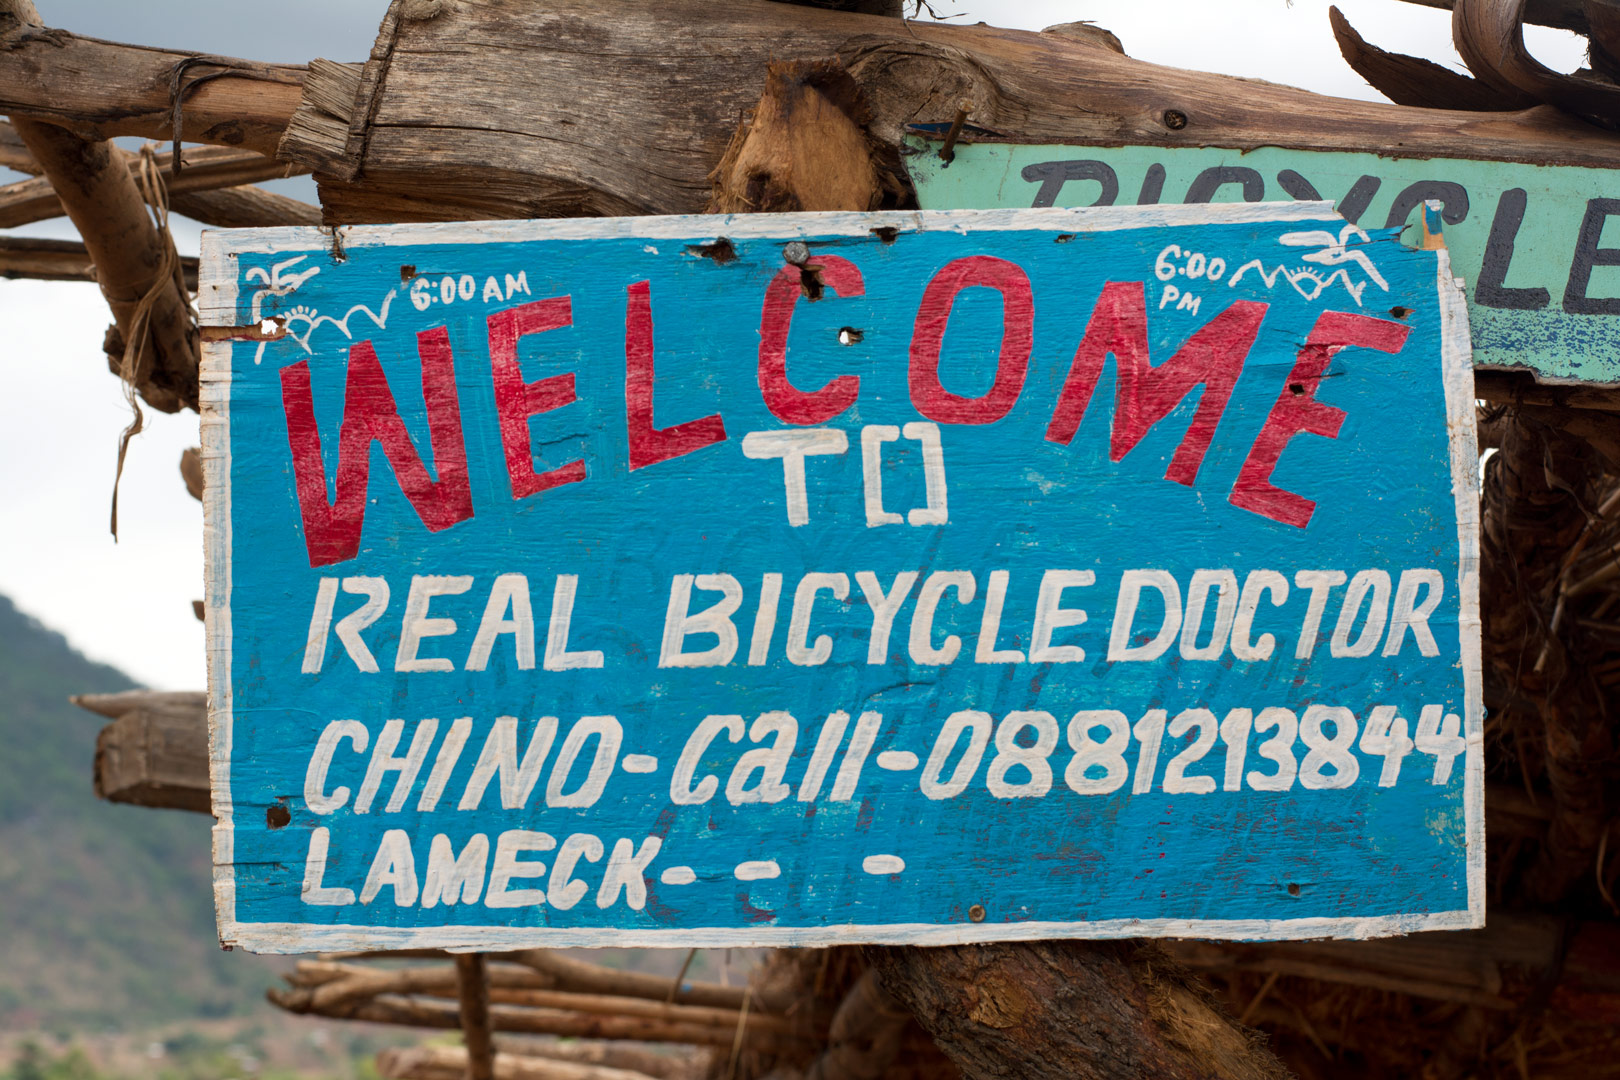 A sign advertising a real bicycle doctor in Africa